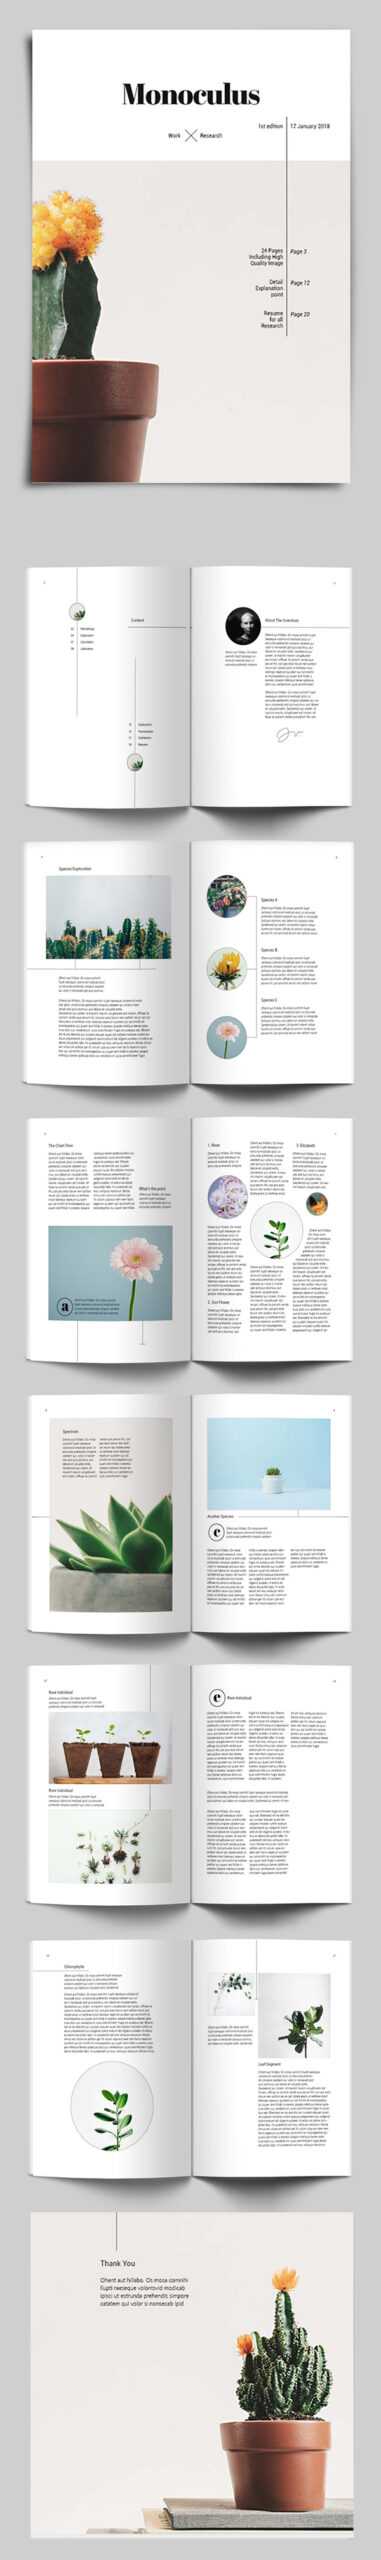 100 Professional Corporate Brochure Templates | Design With Regard To 12 Page Brochure Template